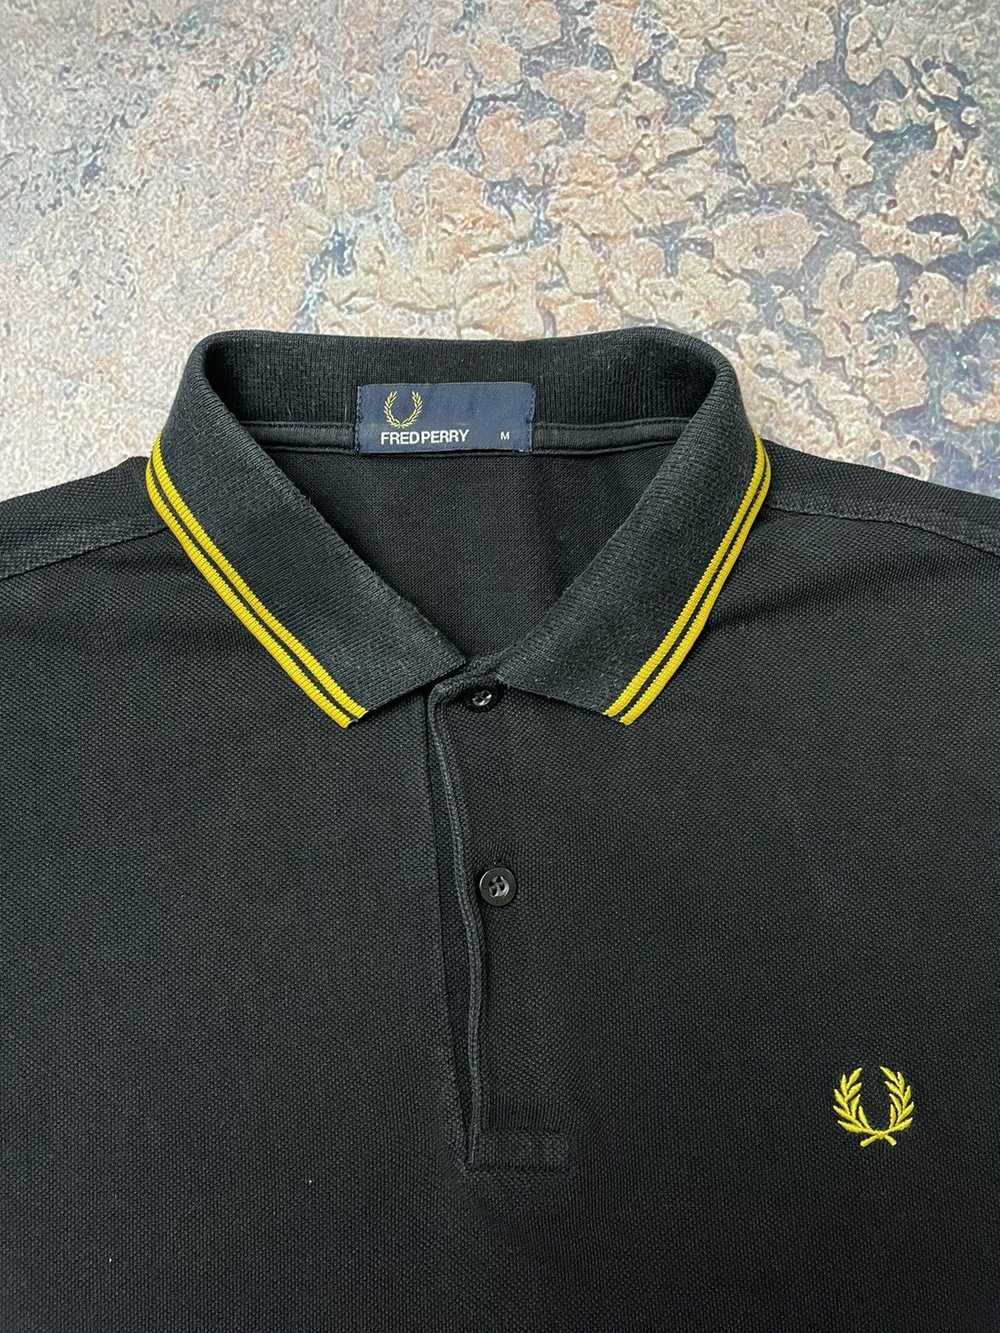 Fred Perry × Luxury × Streetwear Fred Perry casua… - image 7